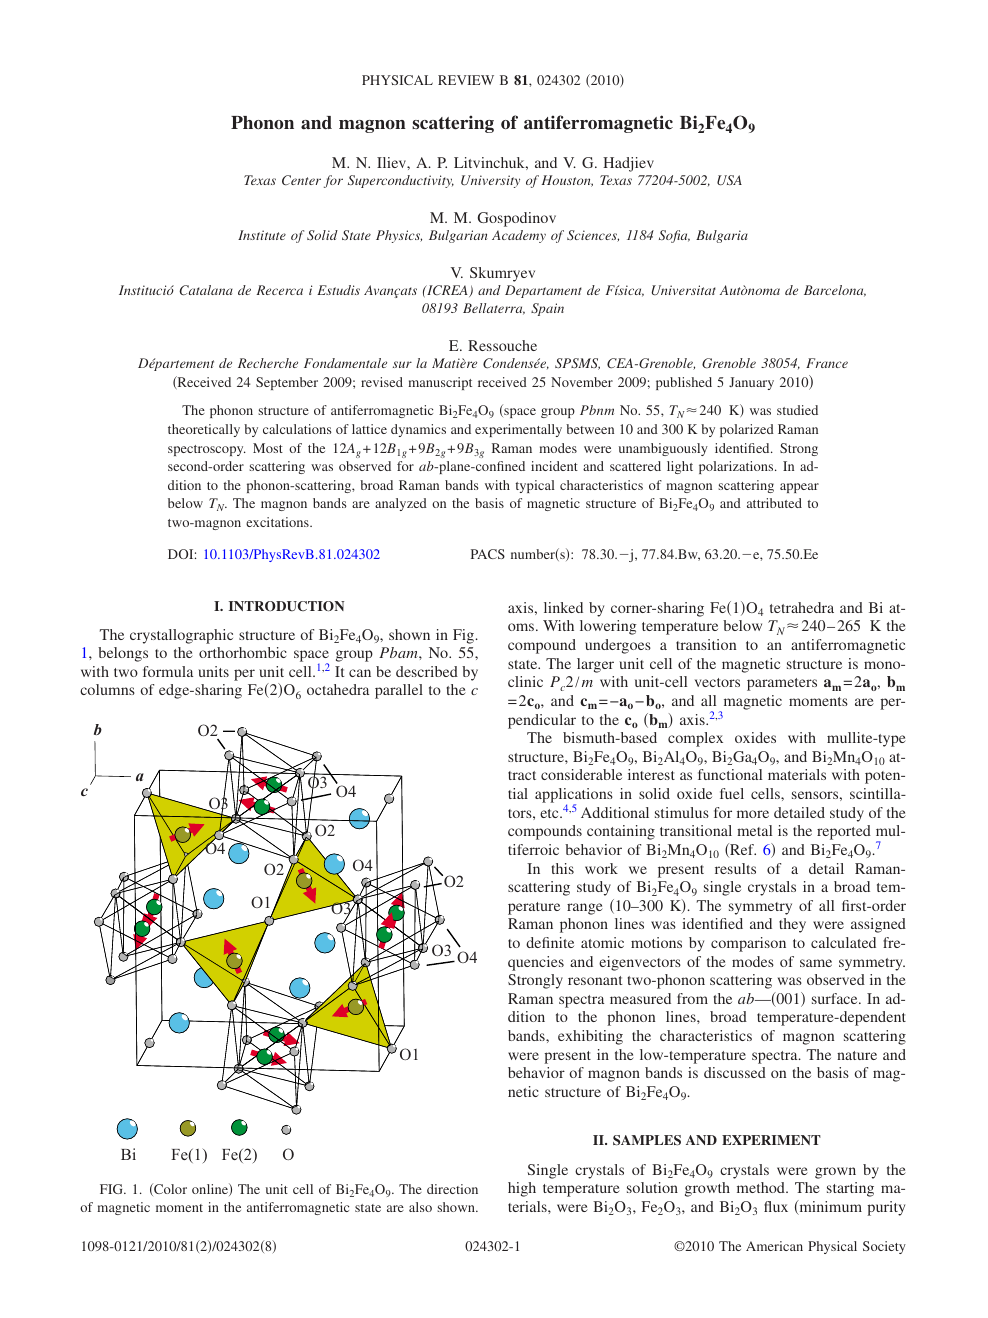 Phonon And Magnon Scattering Of Antiferromagnetic Bi 2 Fe 4 O 9 Topic Of Research Paper In Nano Technology Download Scholarly Article Pdf And Read For Free On Cyberleninka Open Science Hub